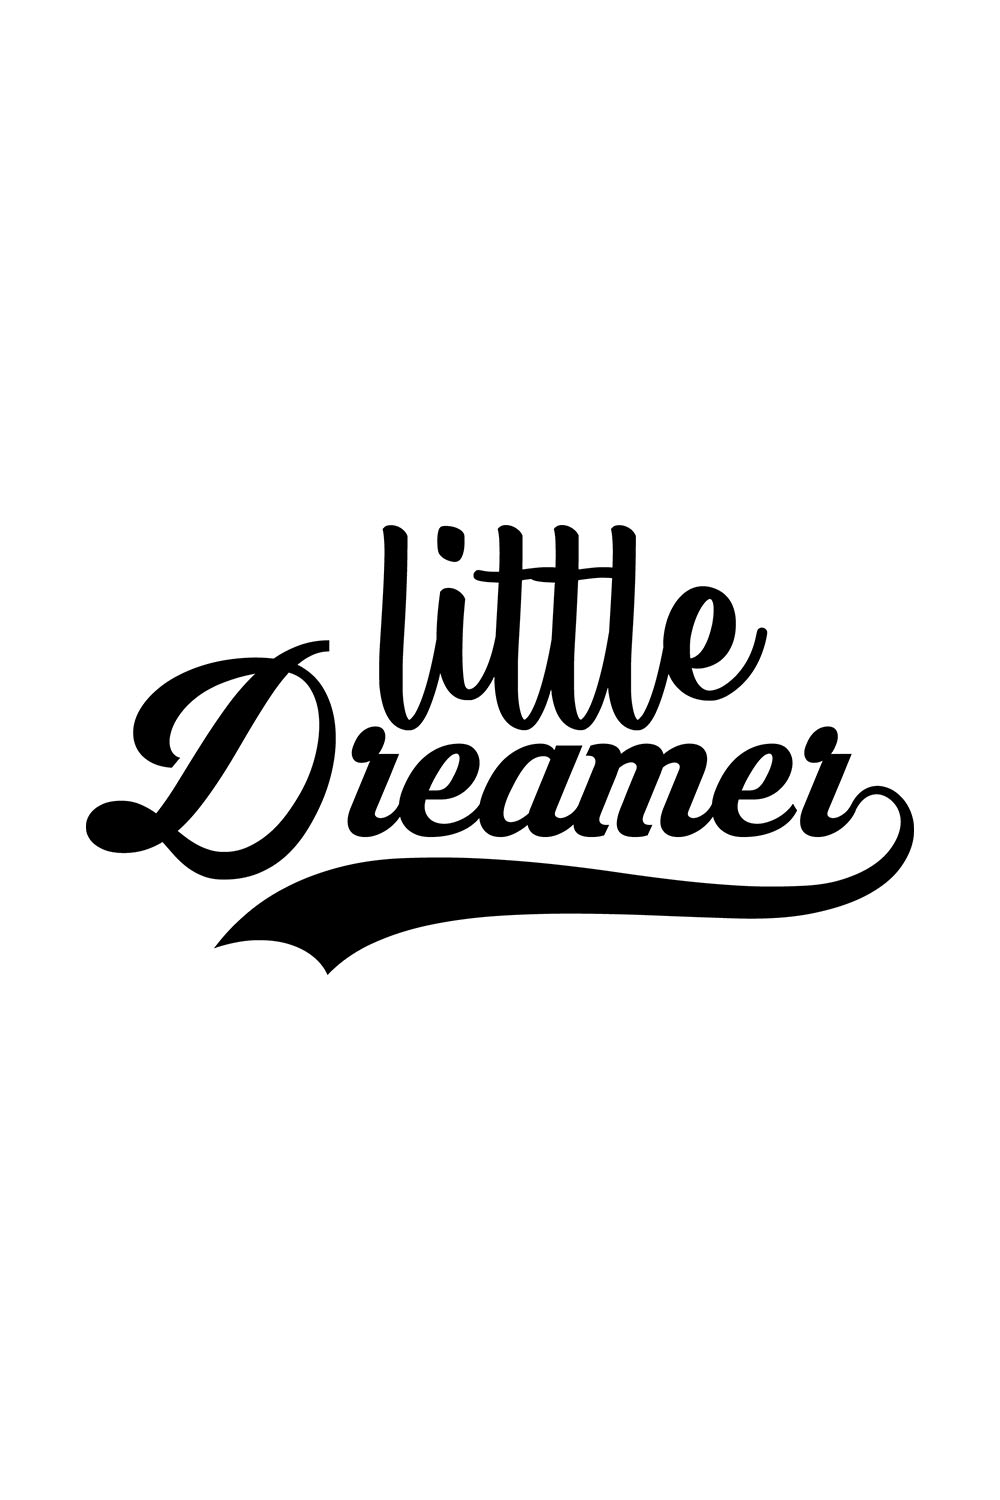 Image with gorgeous black lettering for Little Dreamer prints.